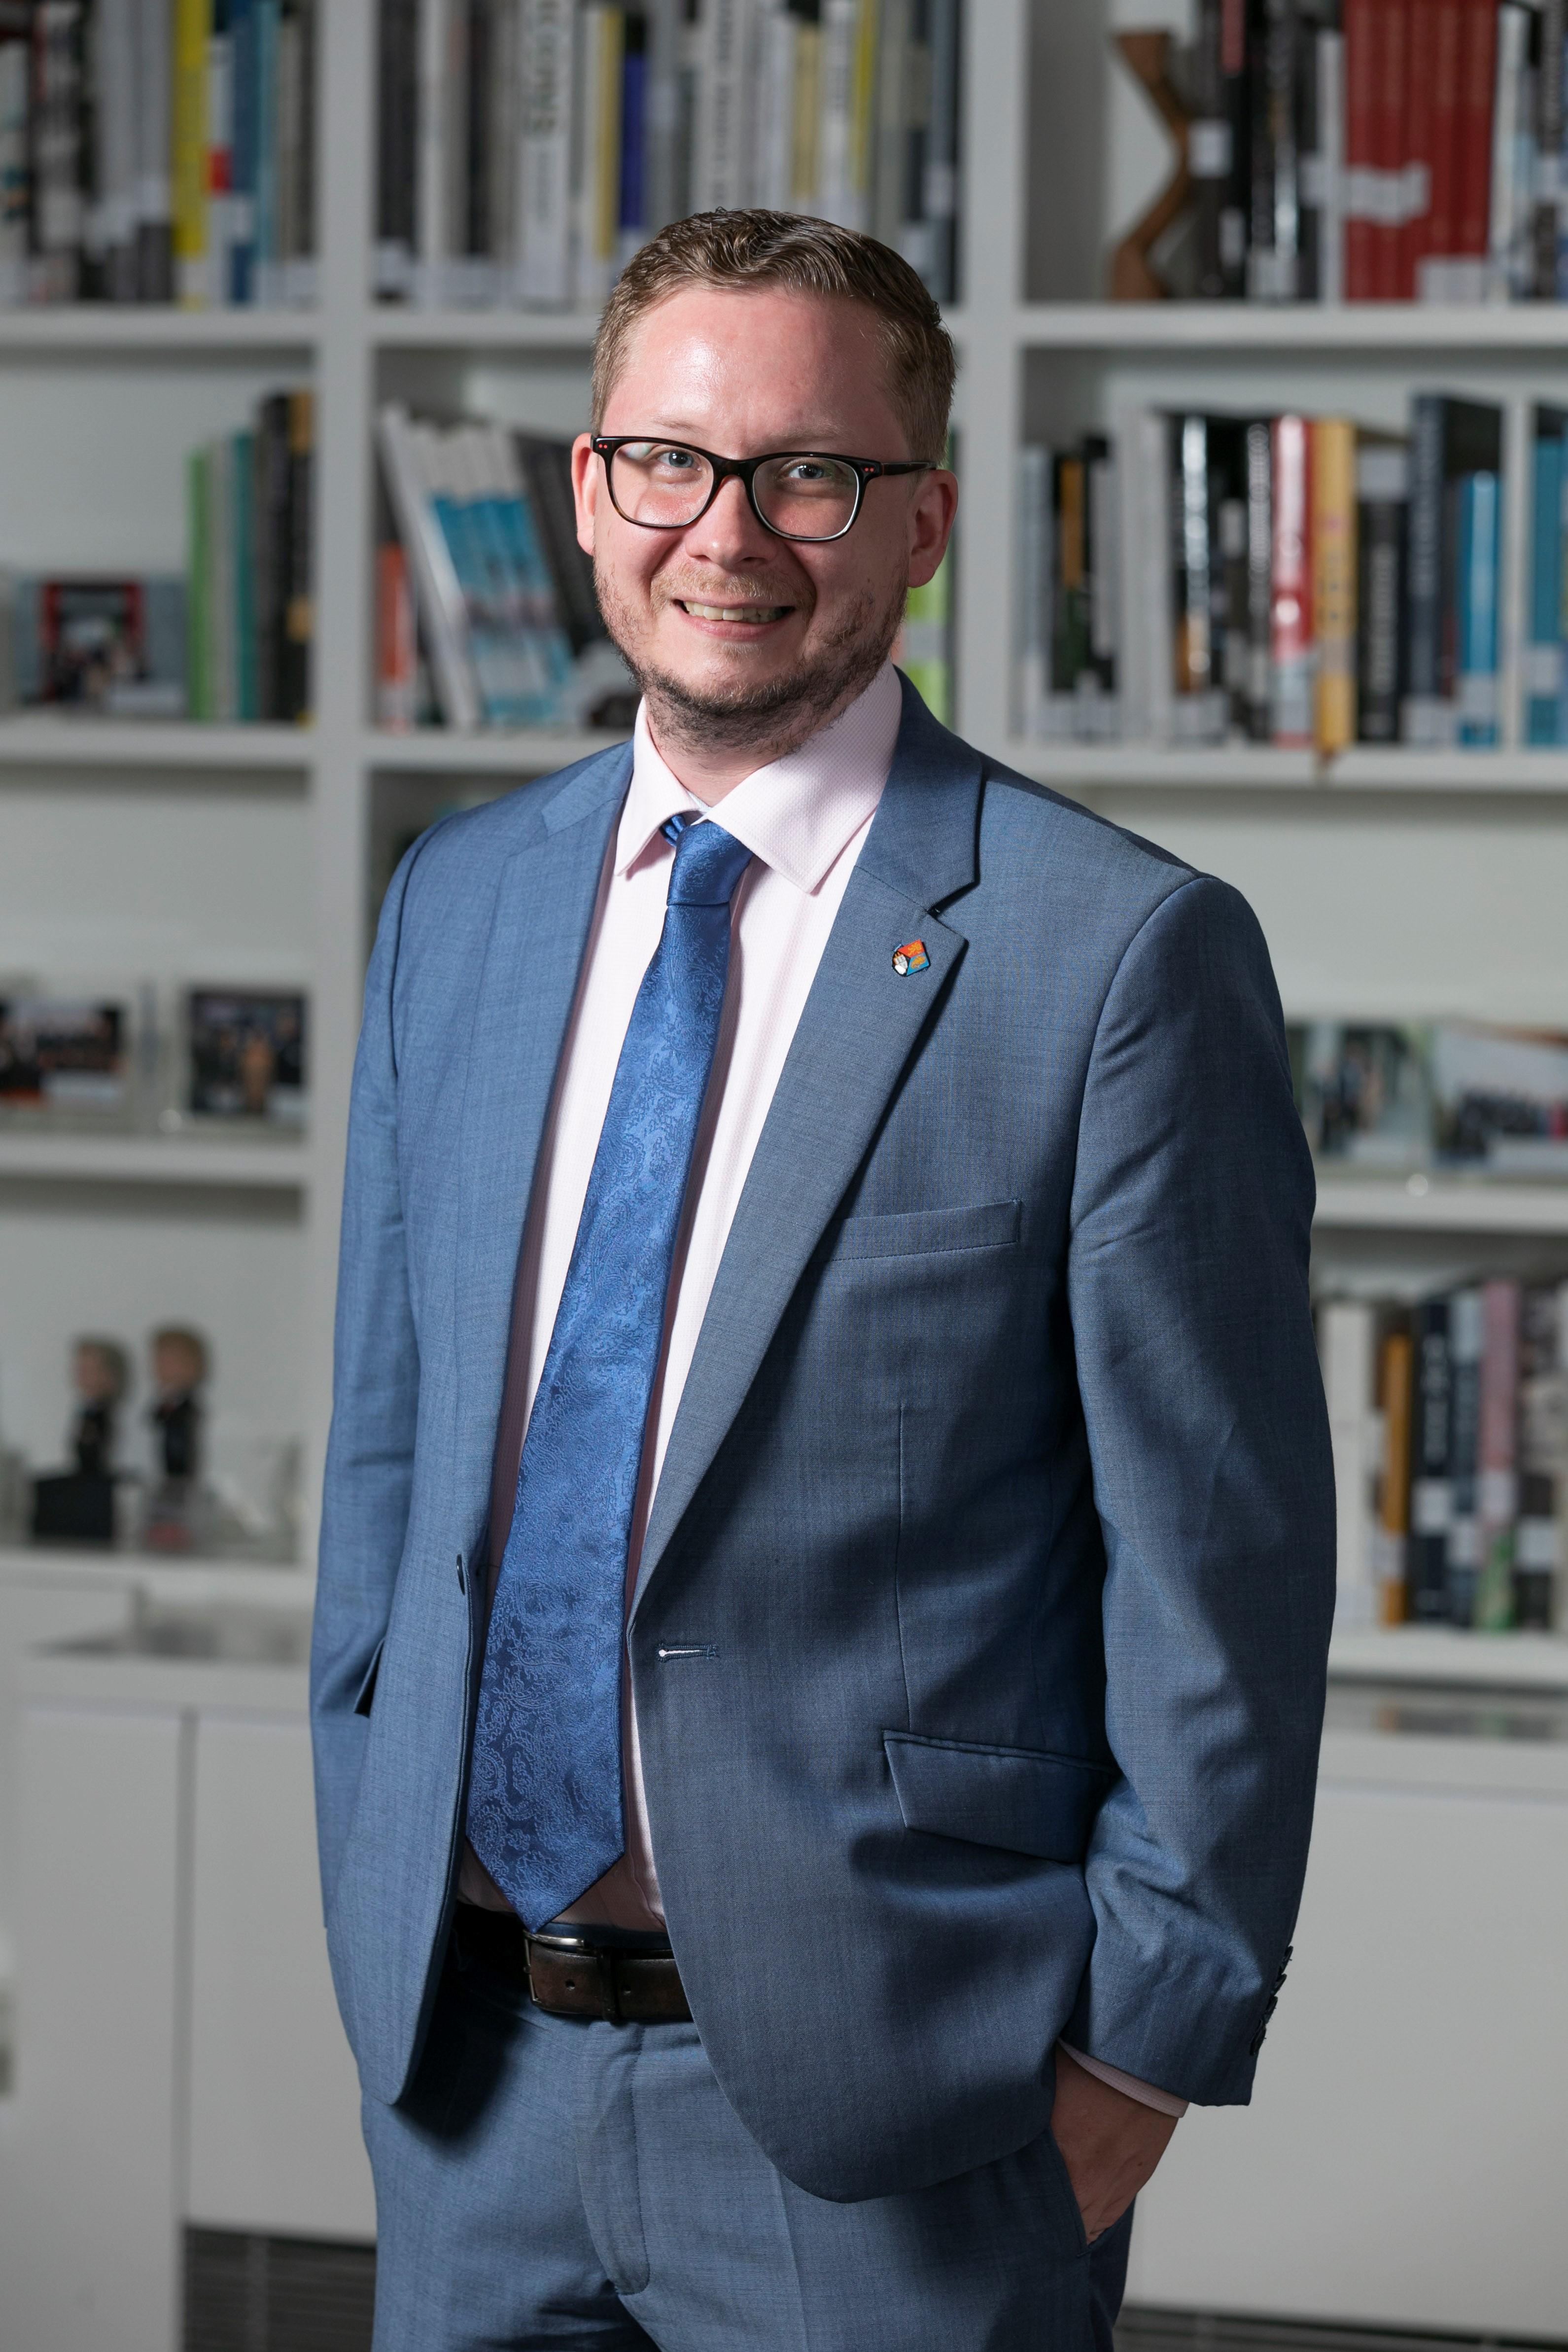 Craig Edwards - white man in a blue suit and tie standing infront of bookshelves